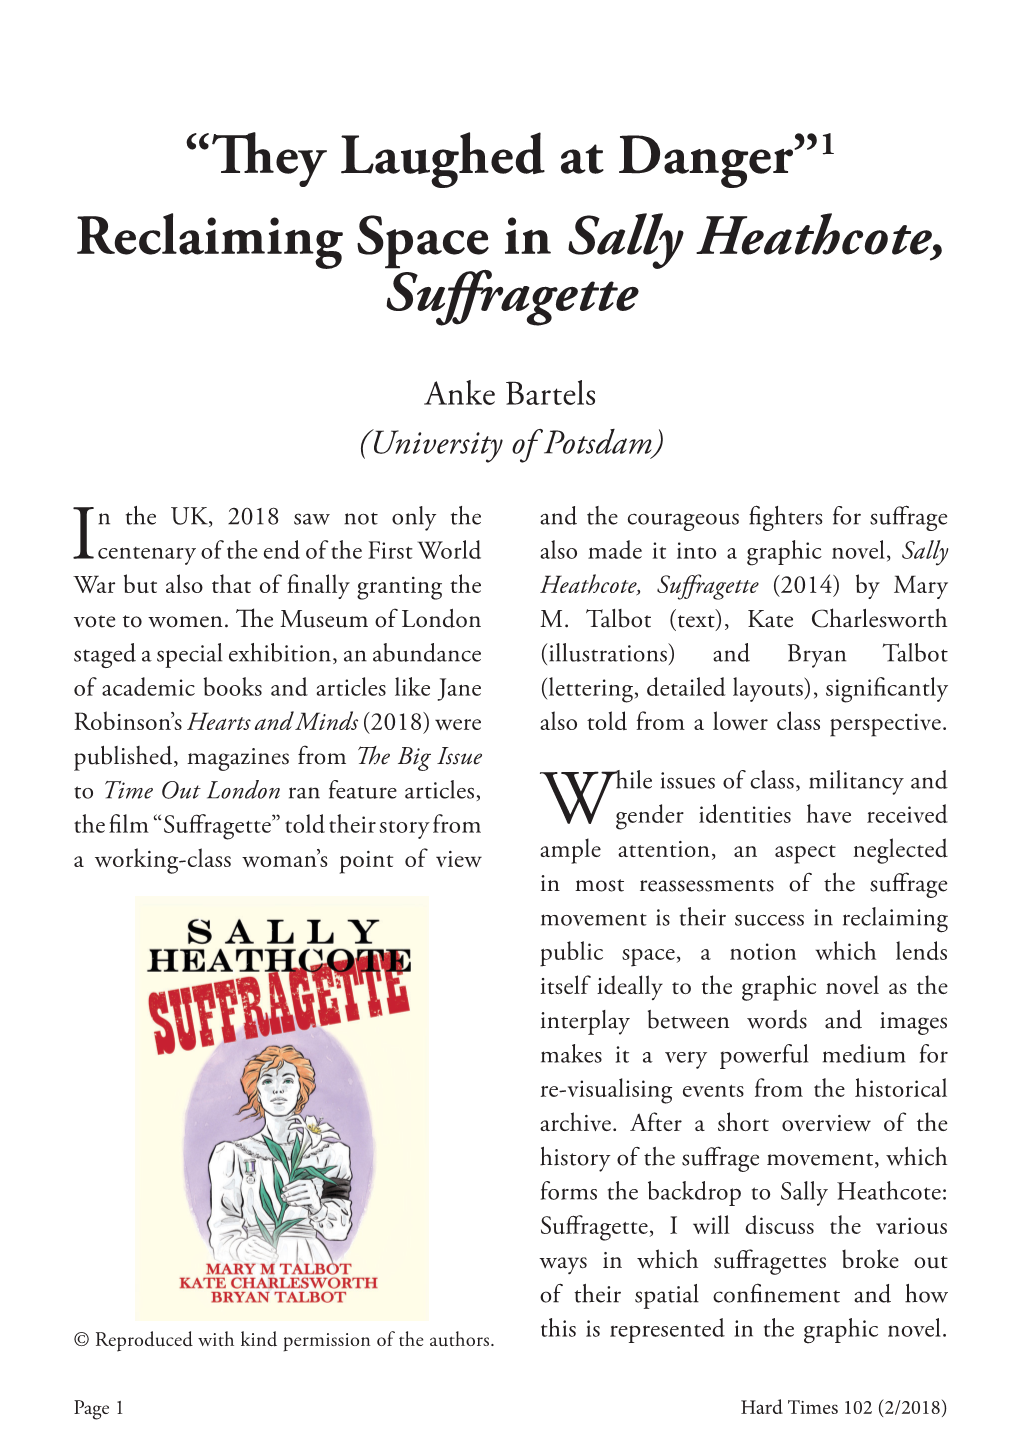 1 Reclaiming Space in Sally Heathcote, Suffragette